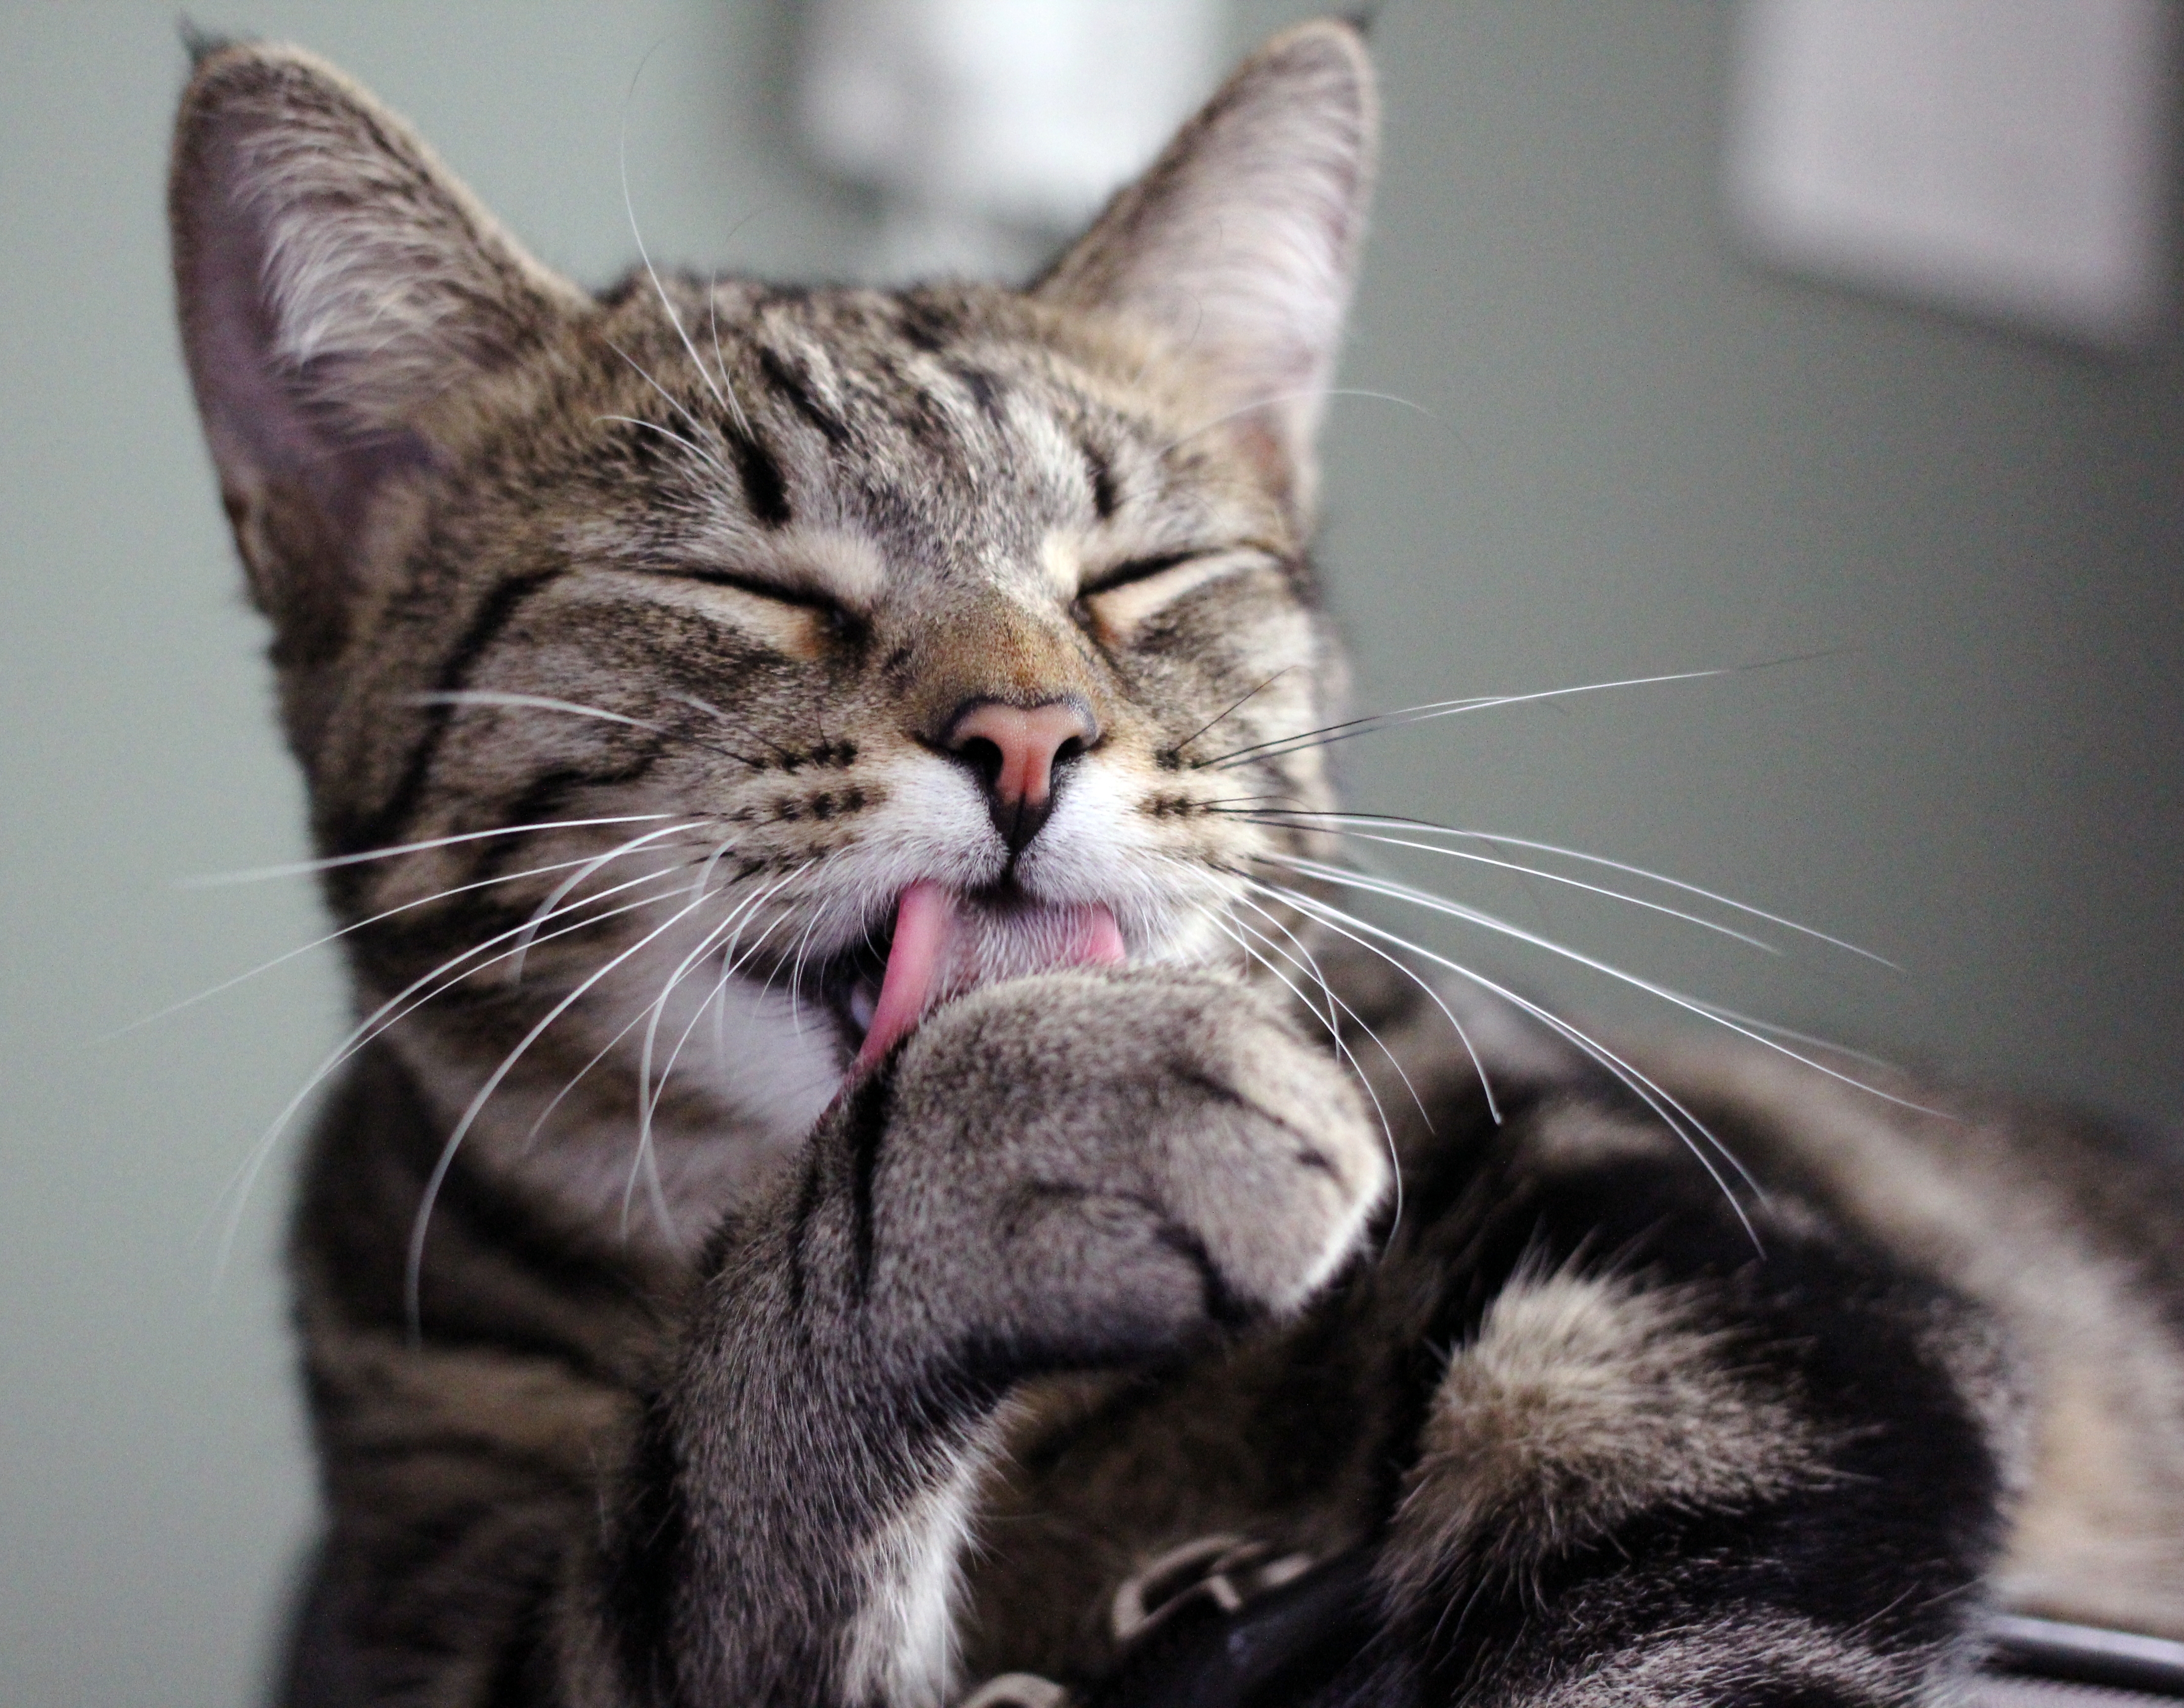 Best Cat Licking Paw Wallpaper - Cat Licking Their Paw , HD Wallpaper & Backgrounds